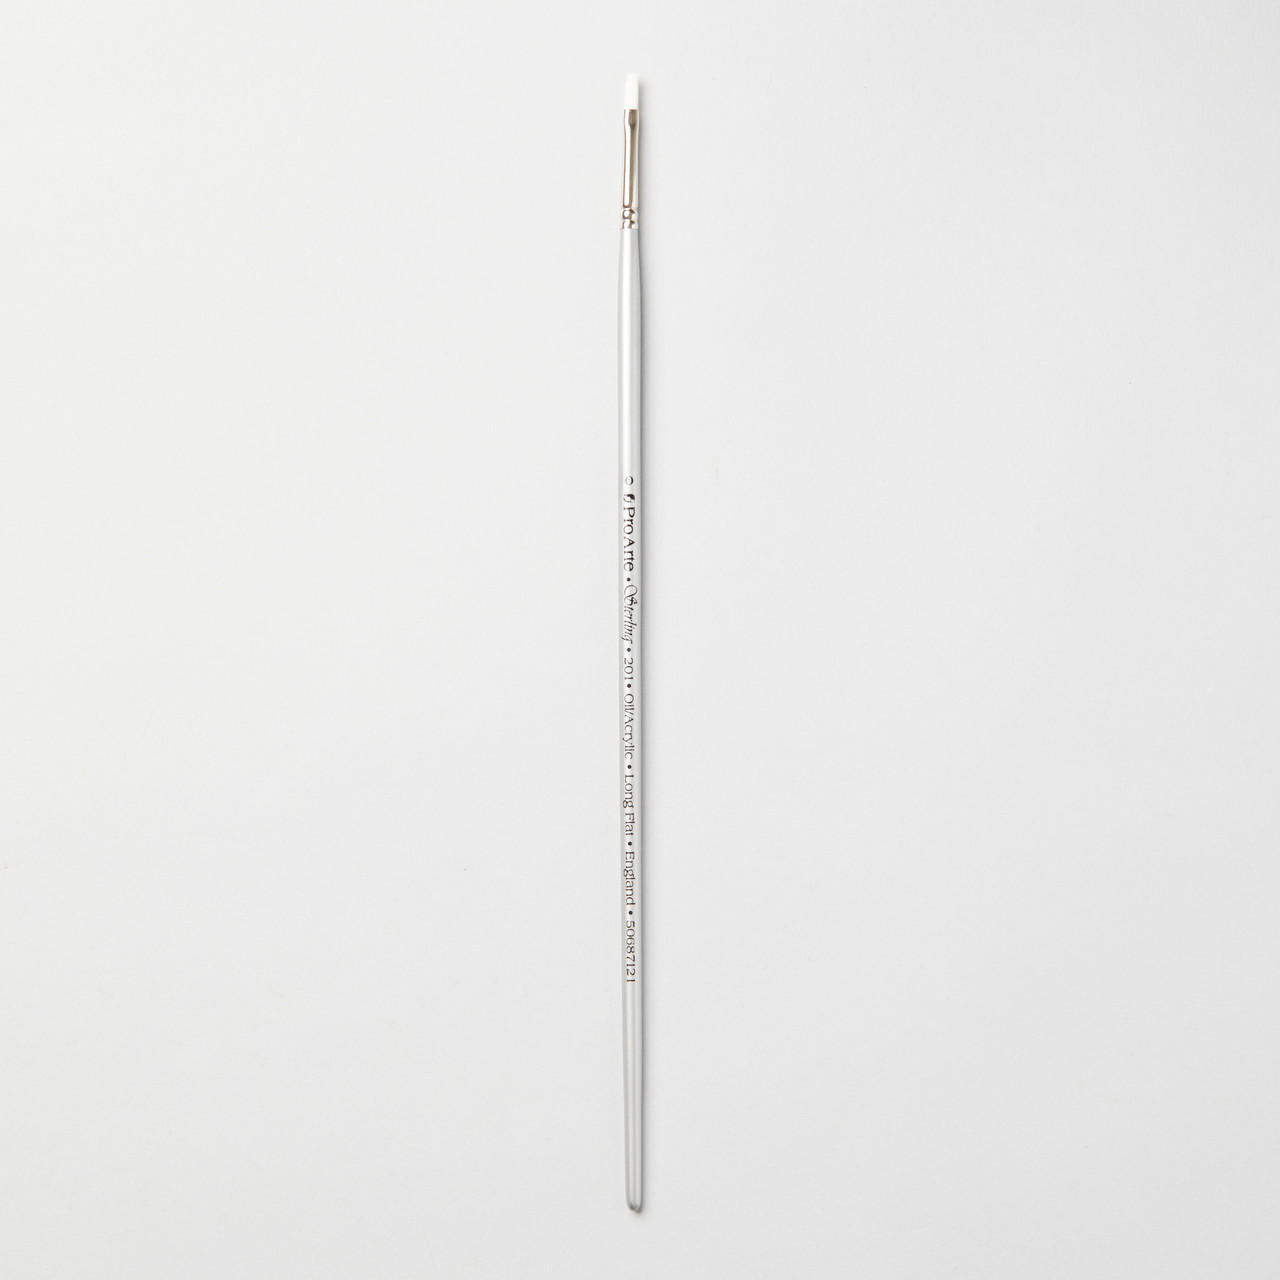 Pro Arte Sterling Acrylix Synthetic Brush Long Flat Series 201 Size 0